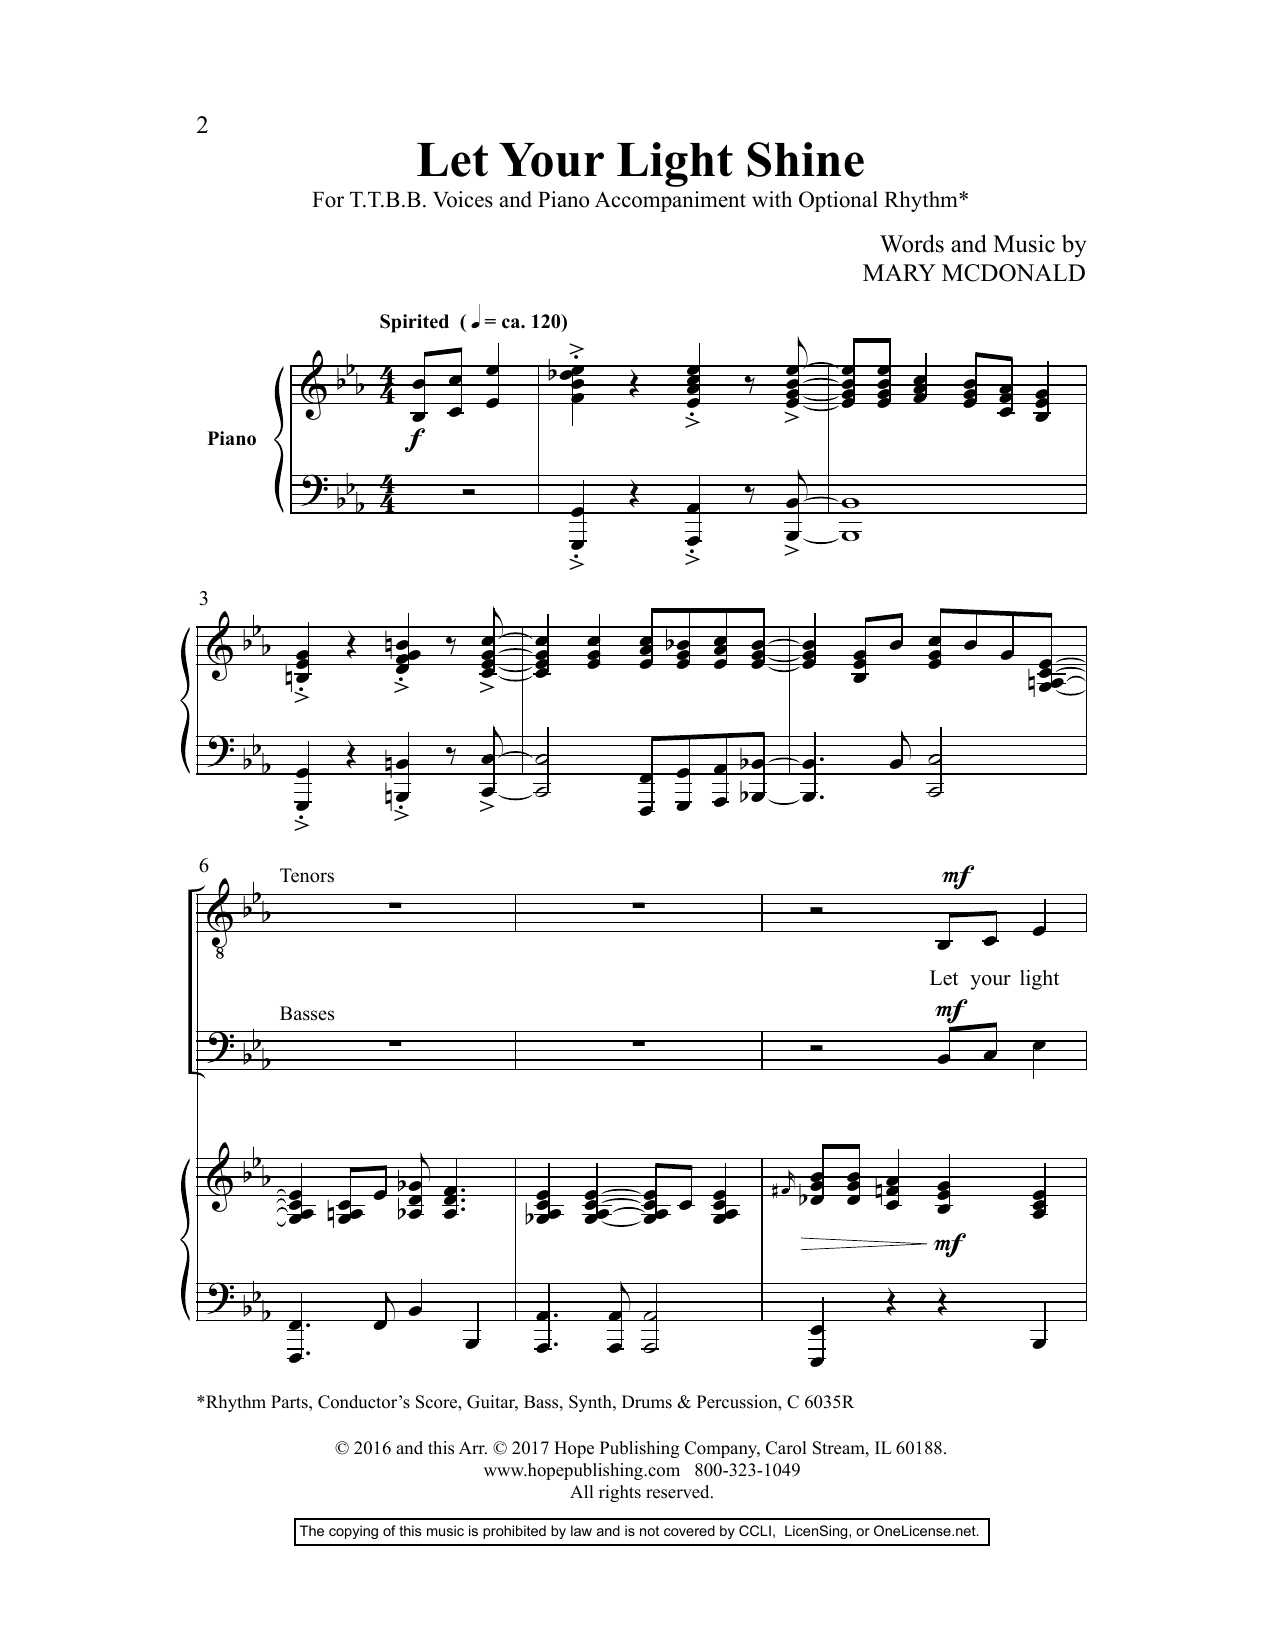 Download Mary McDonald Let Your Light Shine Sheet Music